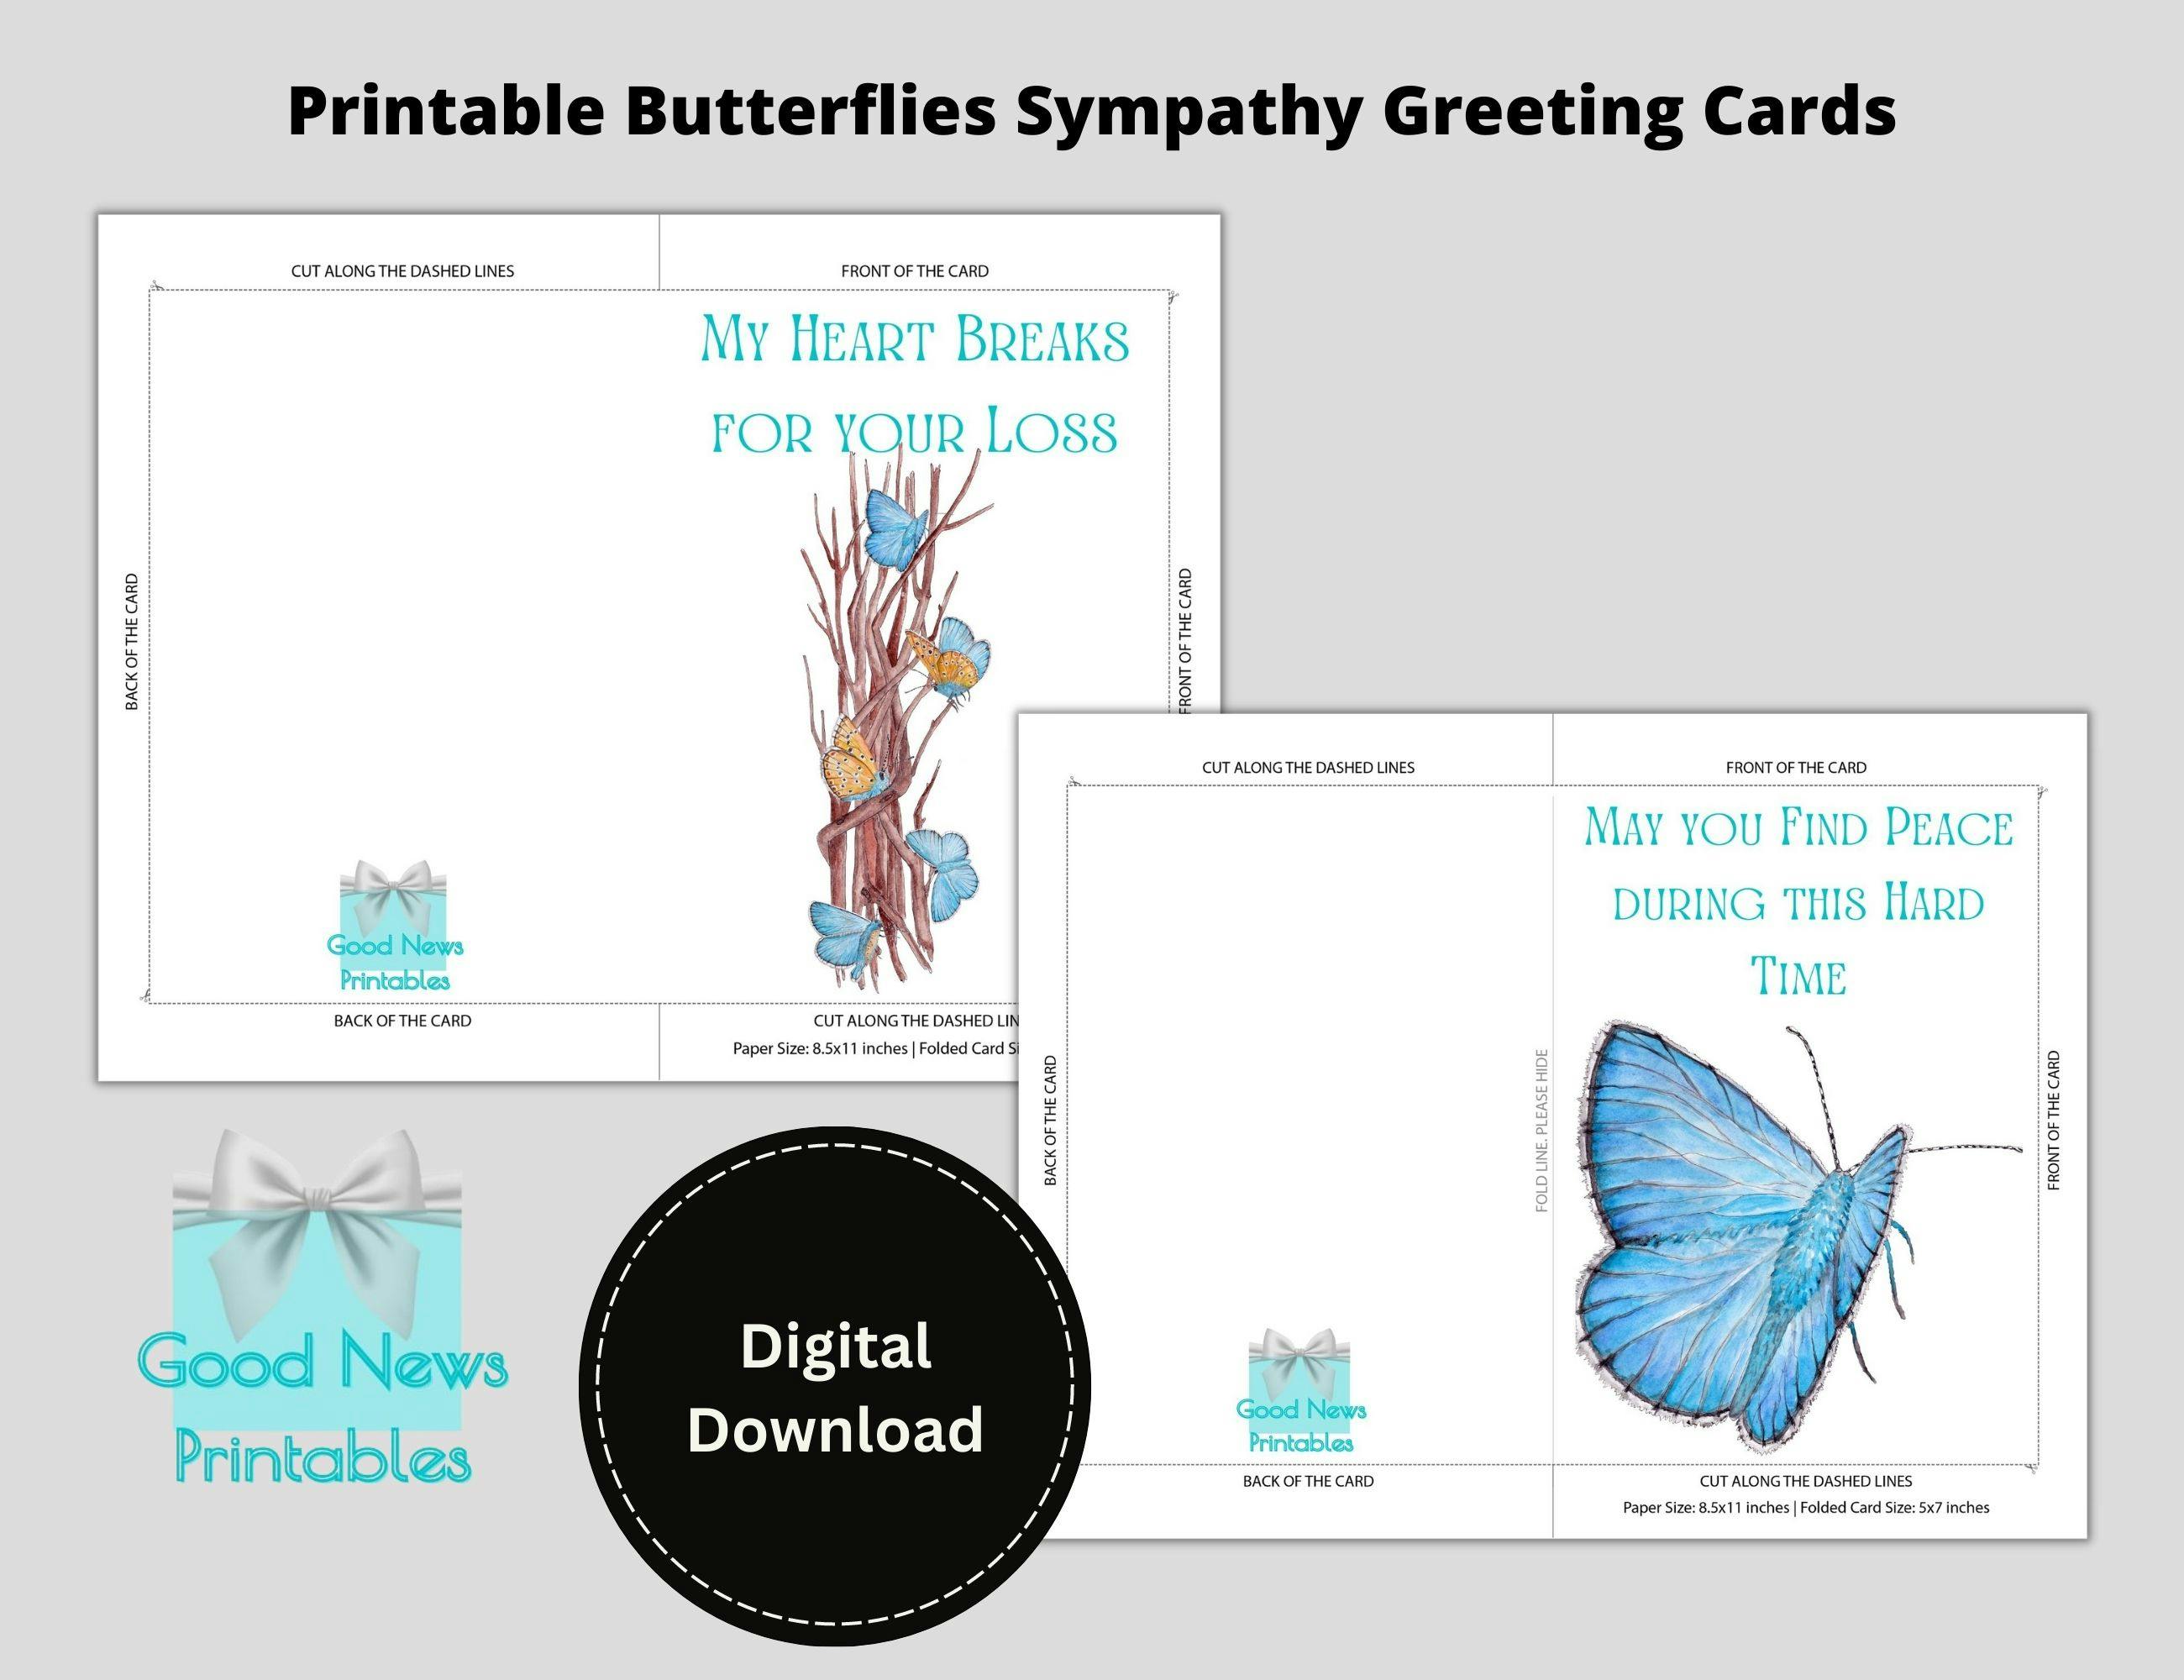  Two Printable Butterflies Sympathy Greeting Cards